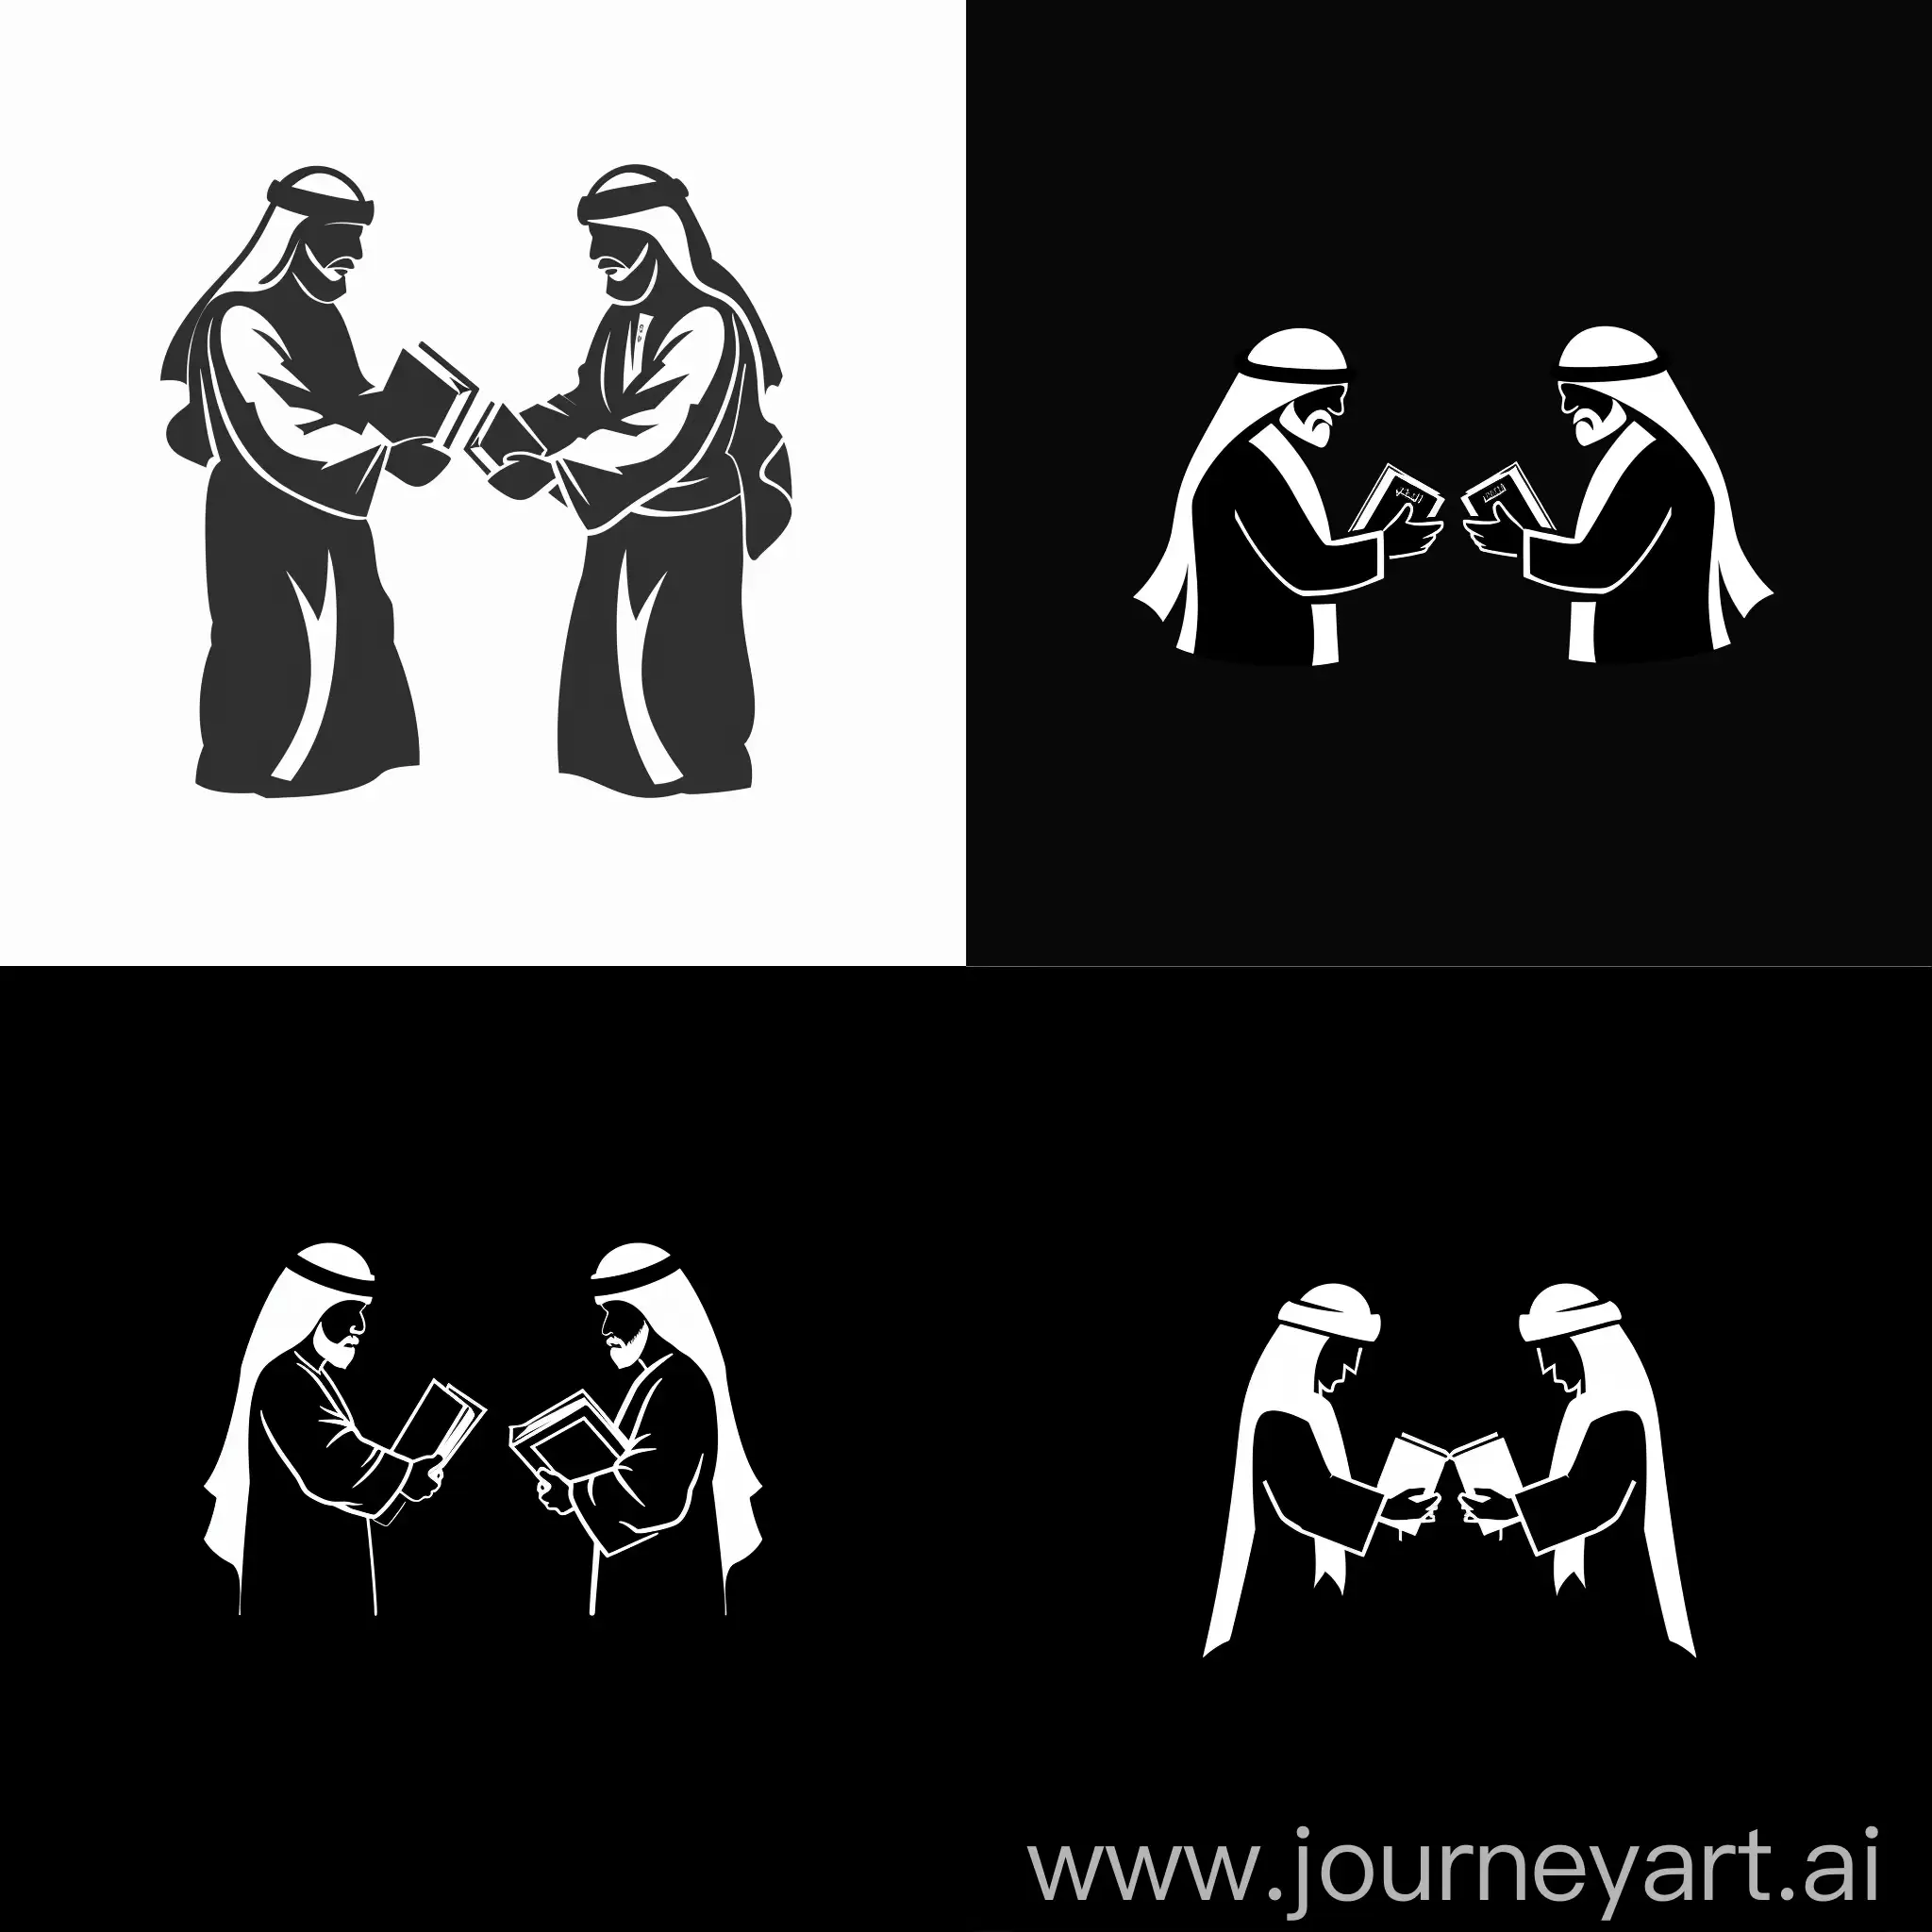 a logo of 2 bedouins men exchanging books, make them full black with no back ground
